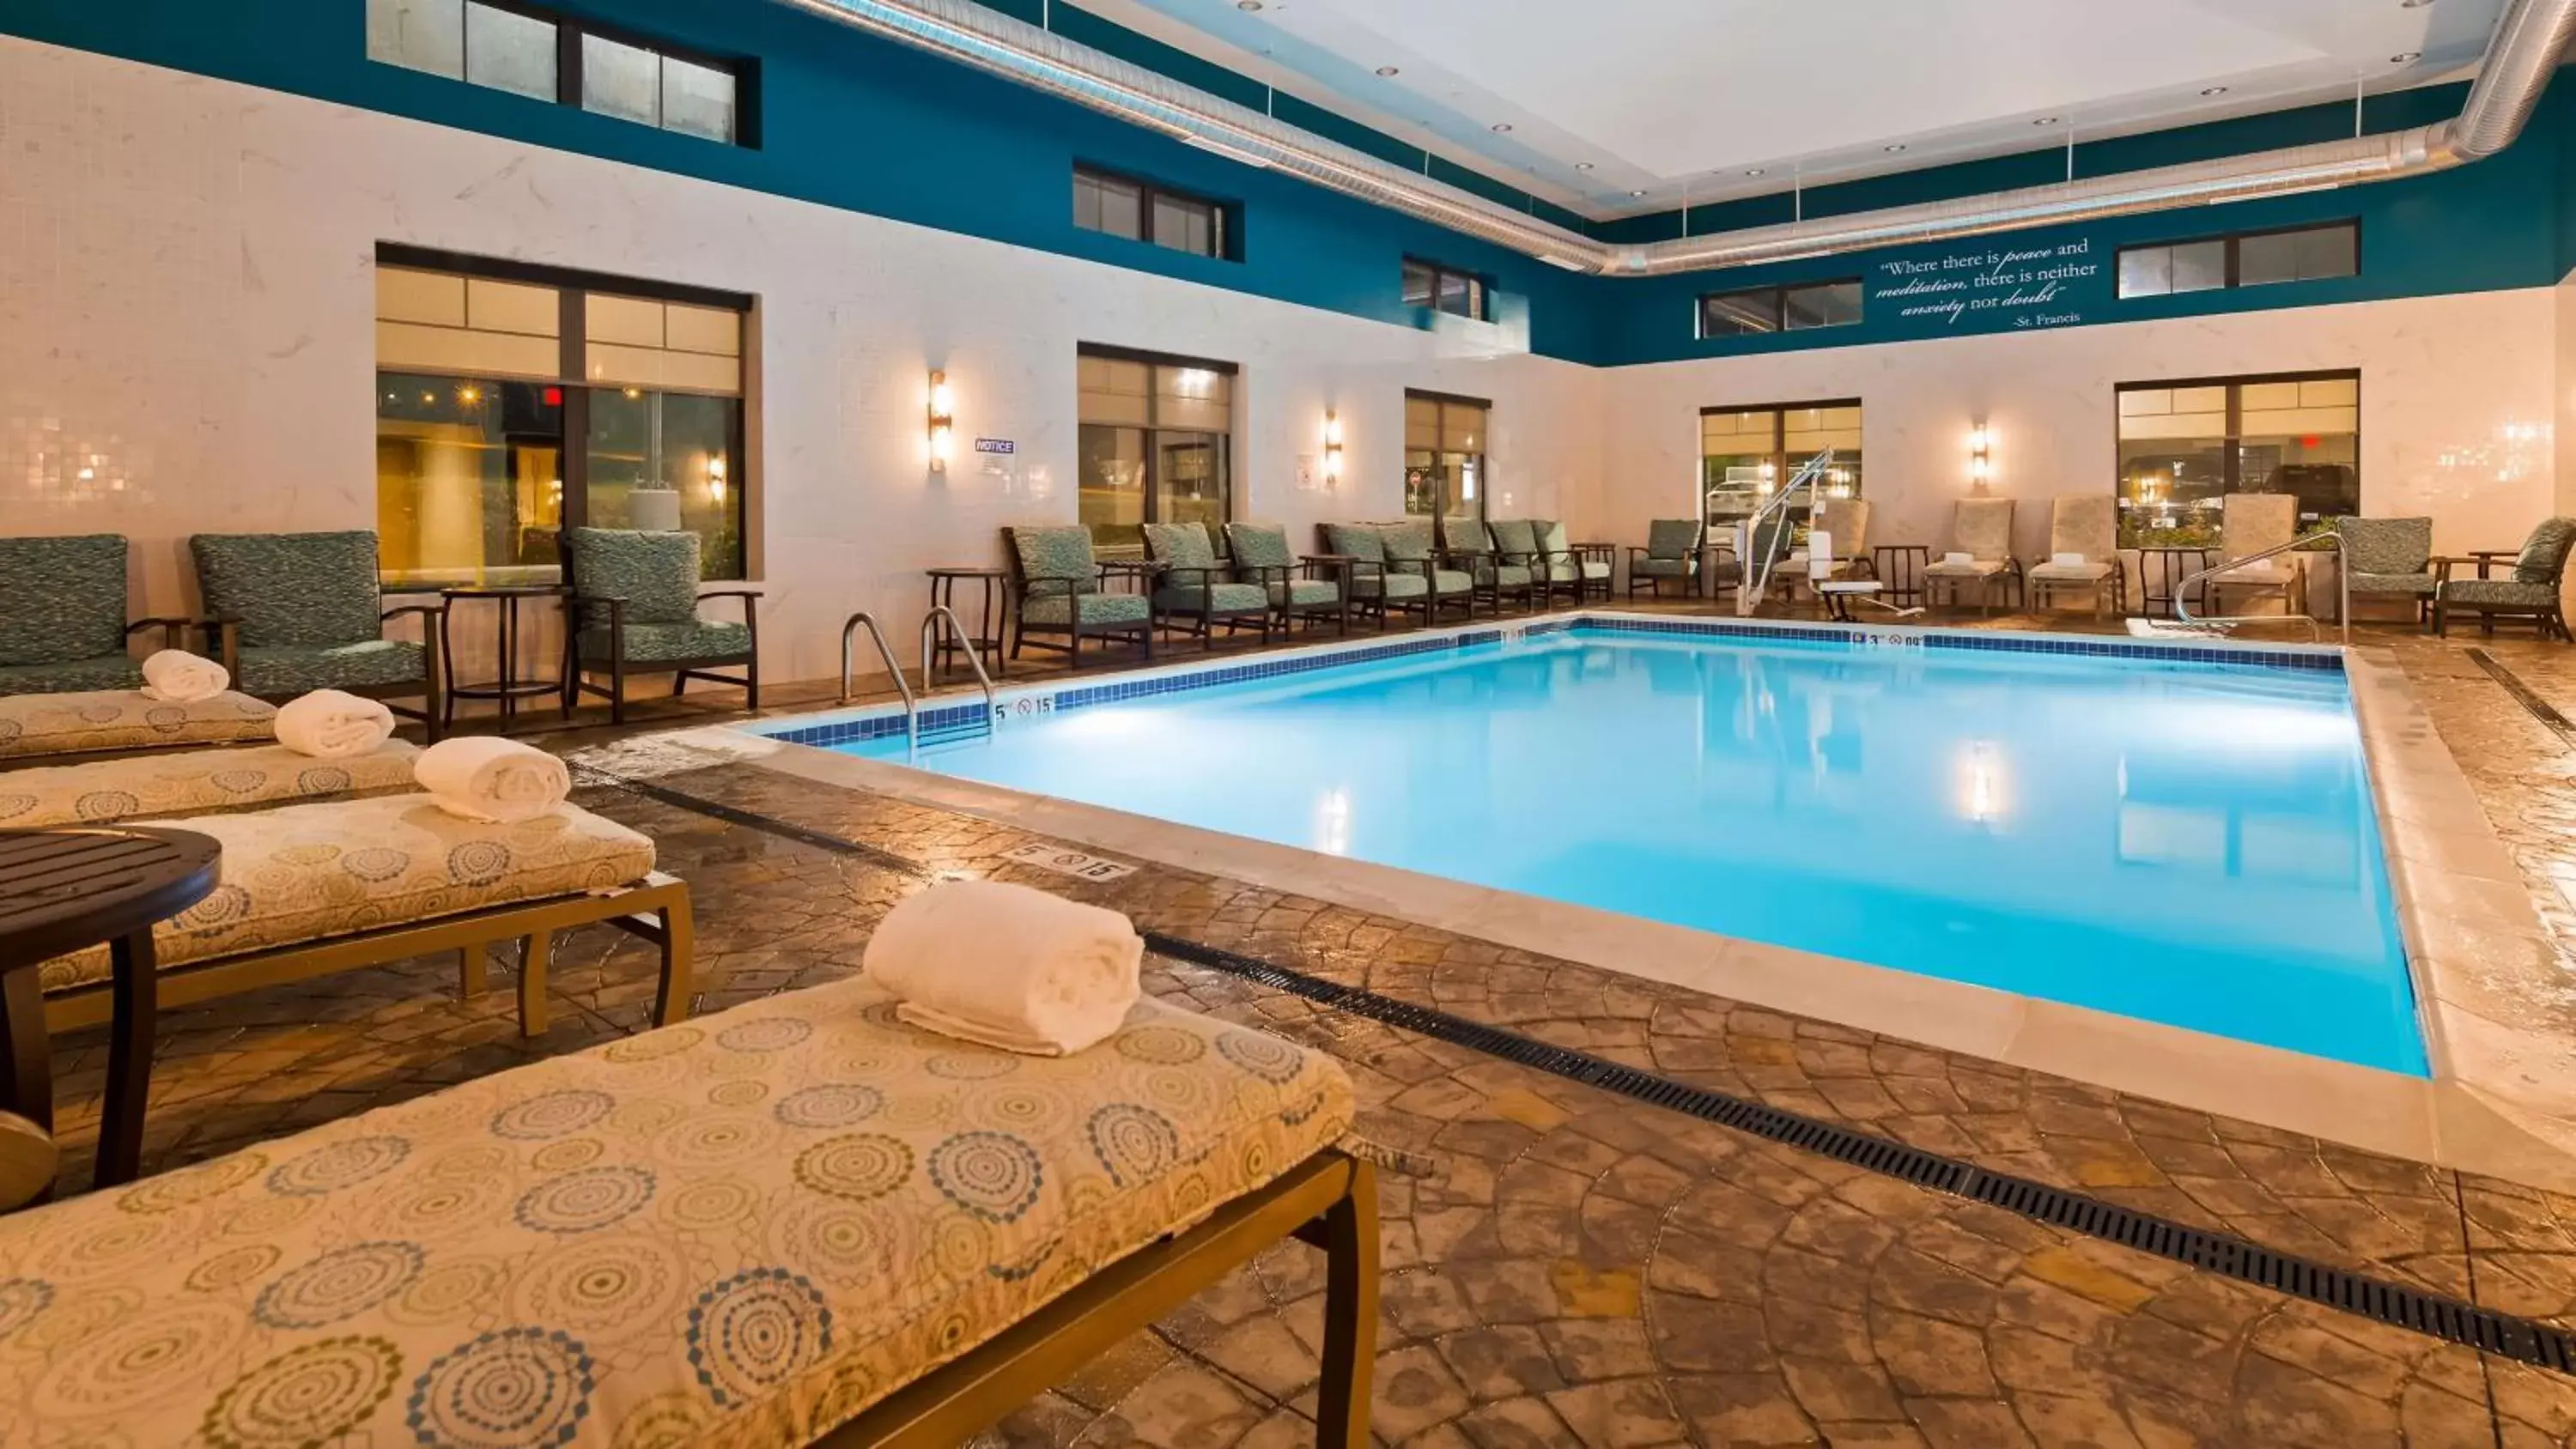 On site, Swimming Pool in Best Western Plus Franciscan Square Inn & Suites Steubenville